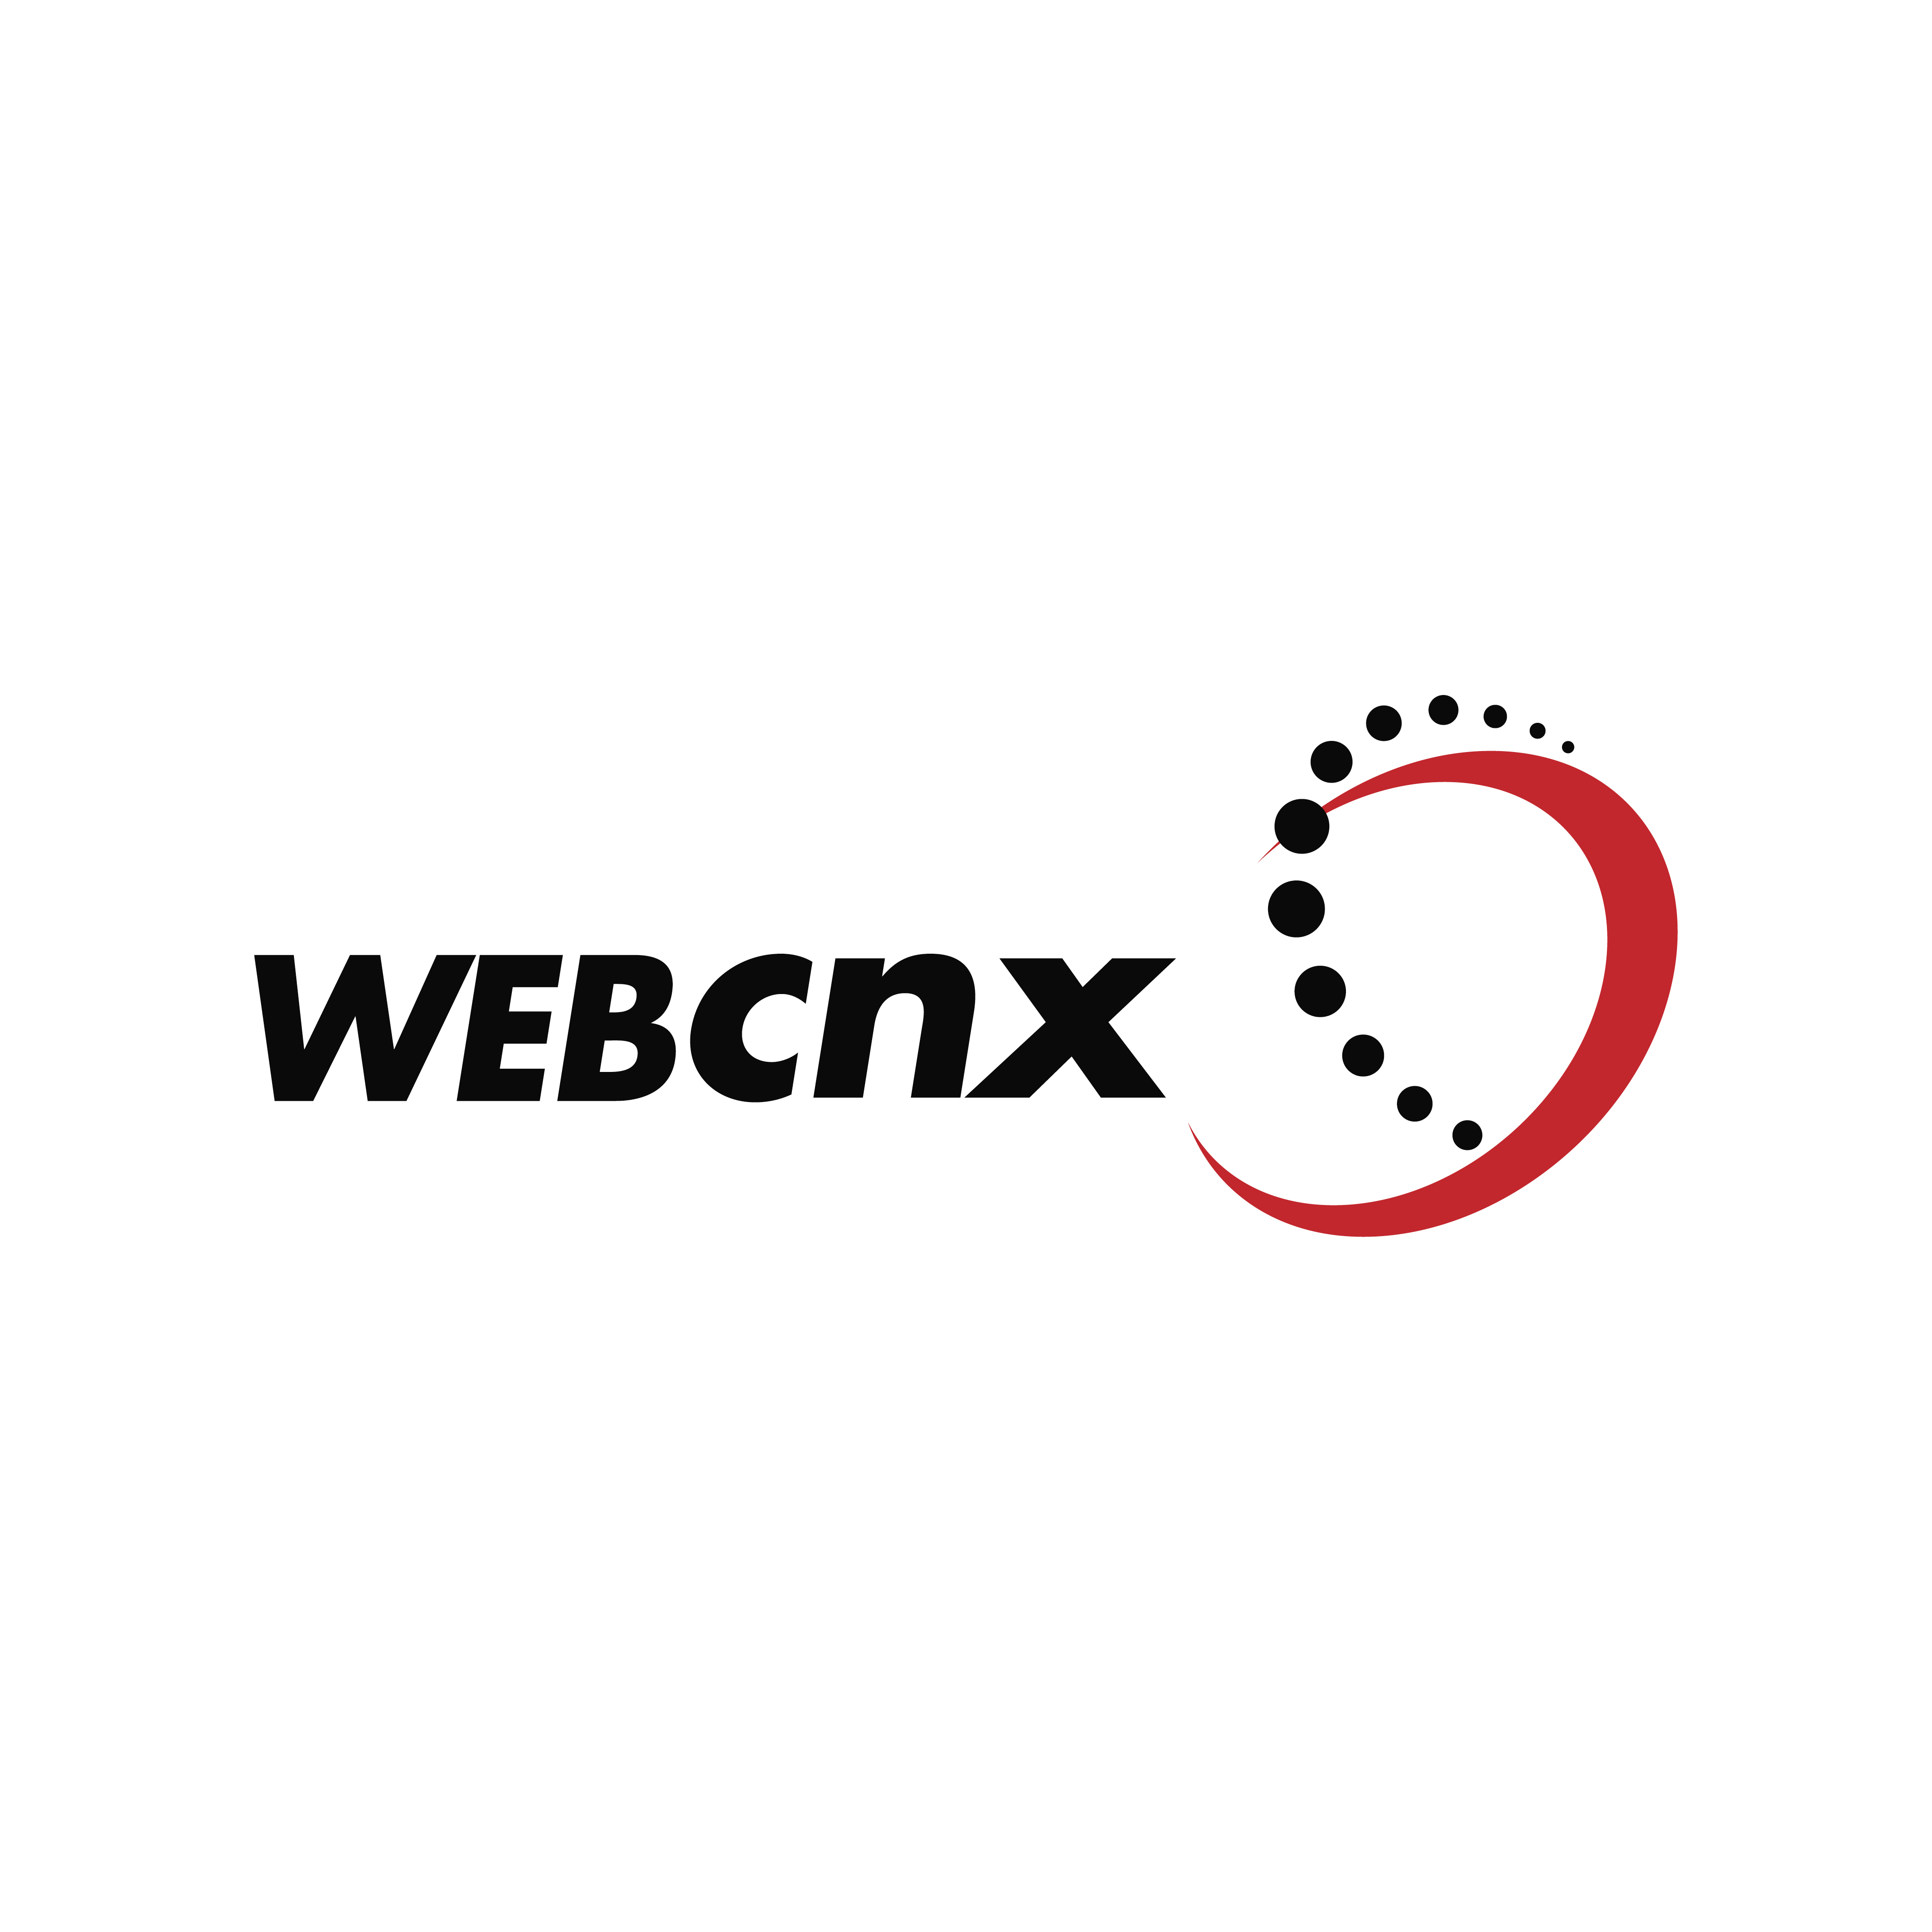 Latest release of project management software WEBcnx 2019 out now